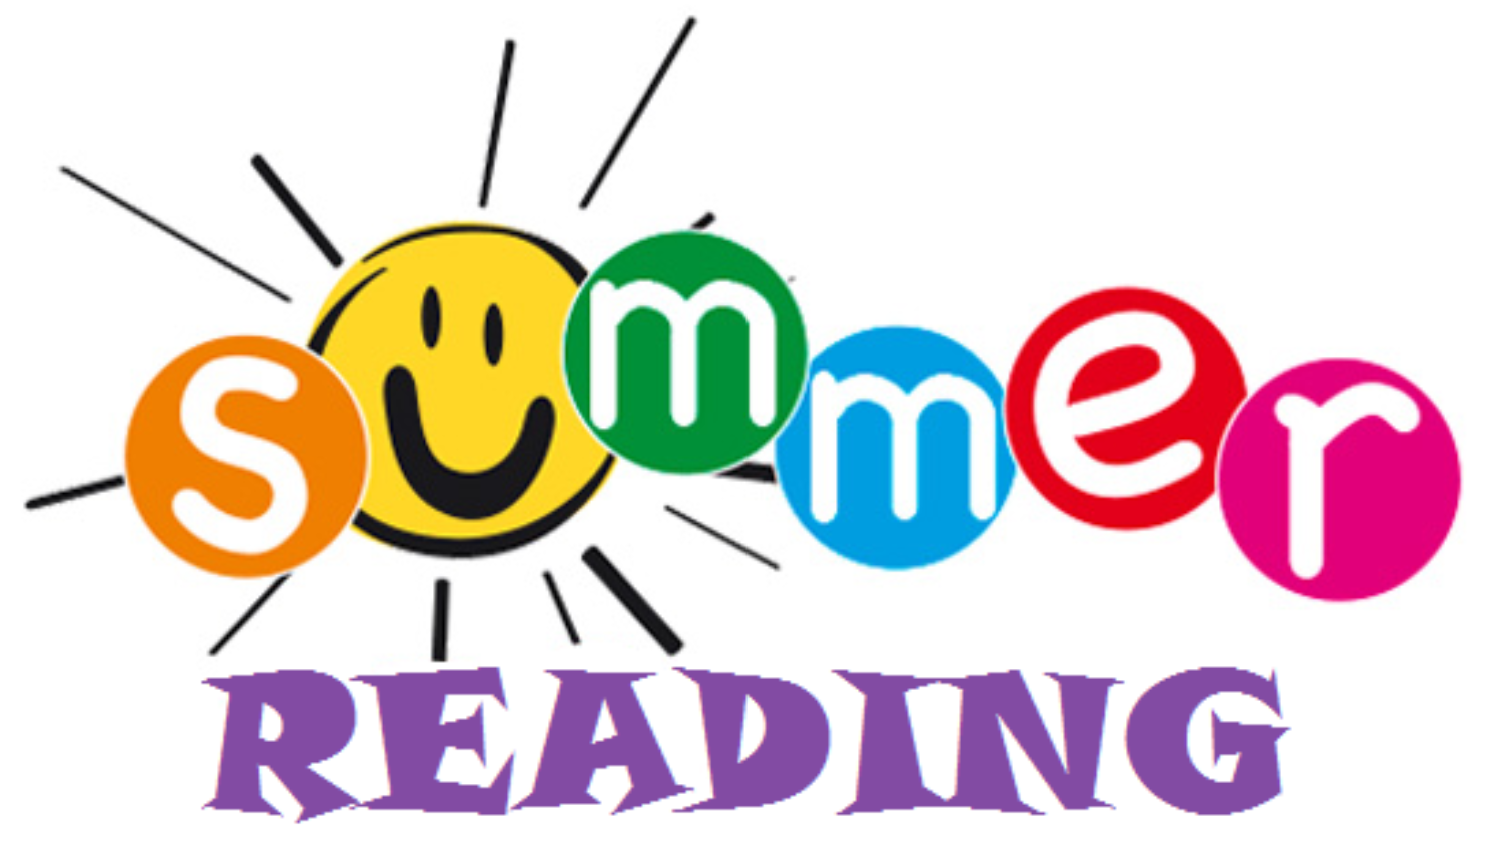 text in colorful circles with a smily face includes text summer reading